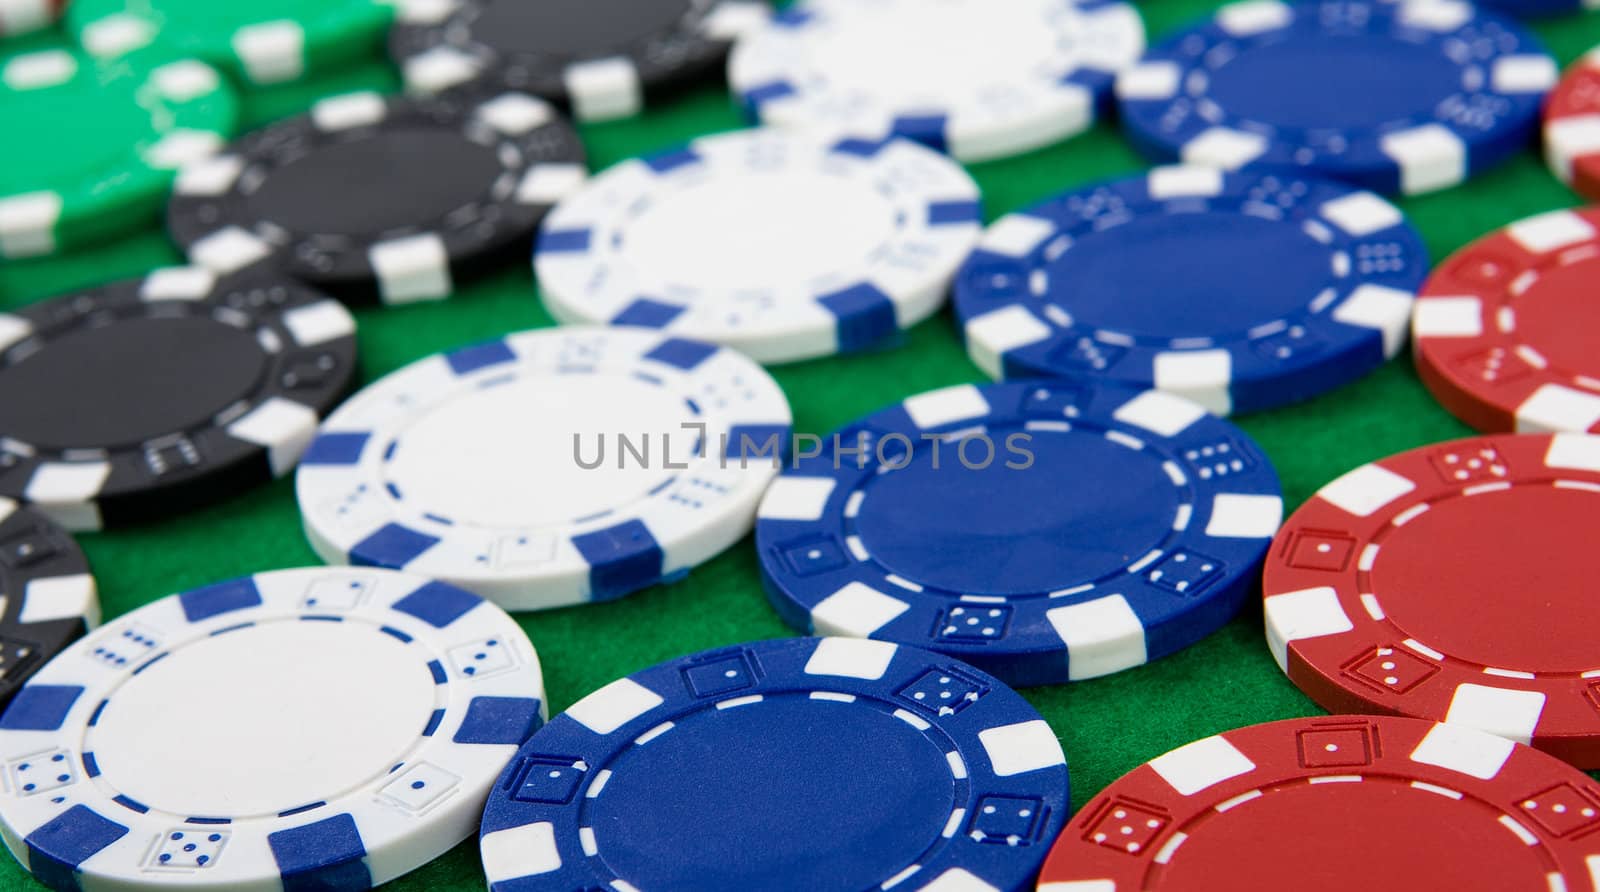 Background of different poker chips on green poker table.